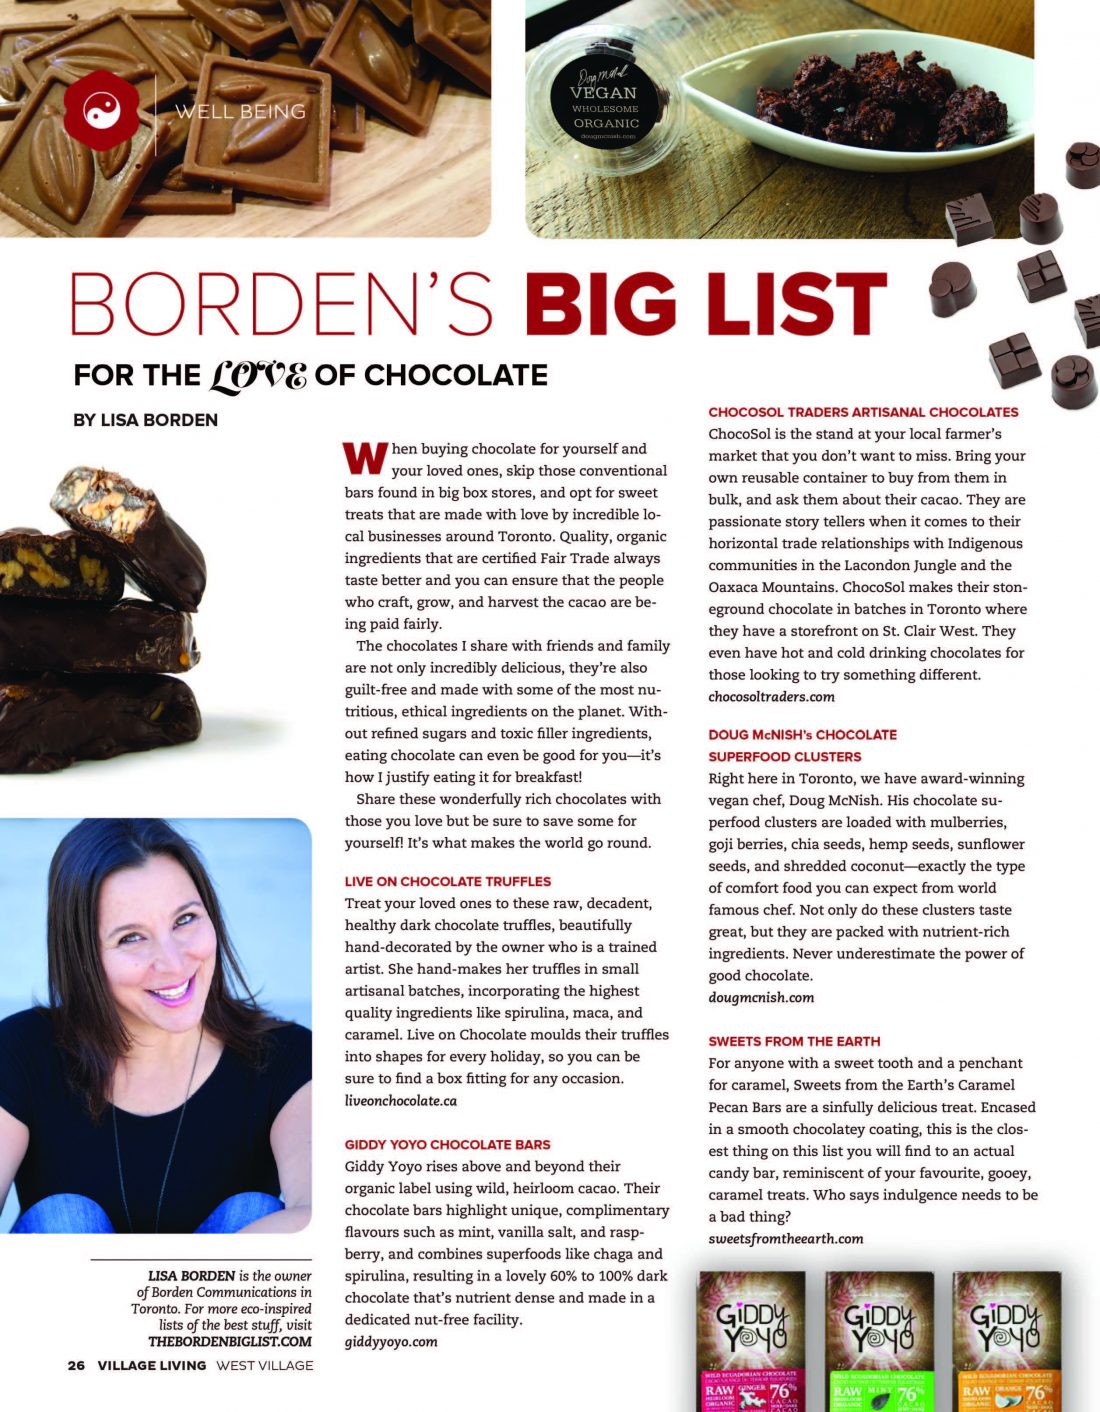 For The Love Of Chocolate, Village Living Magazine